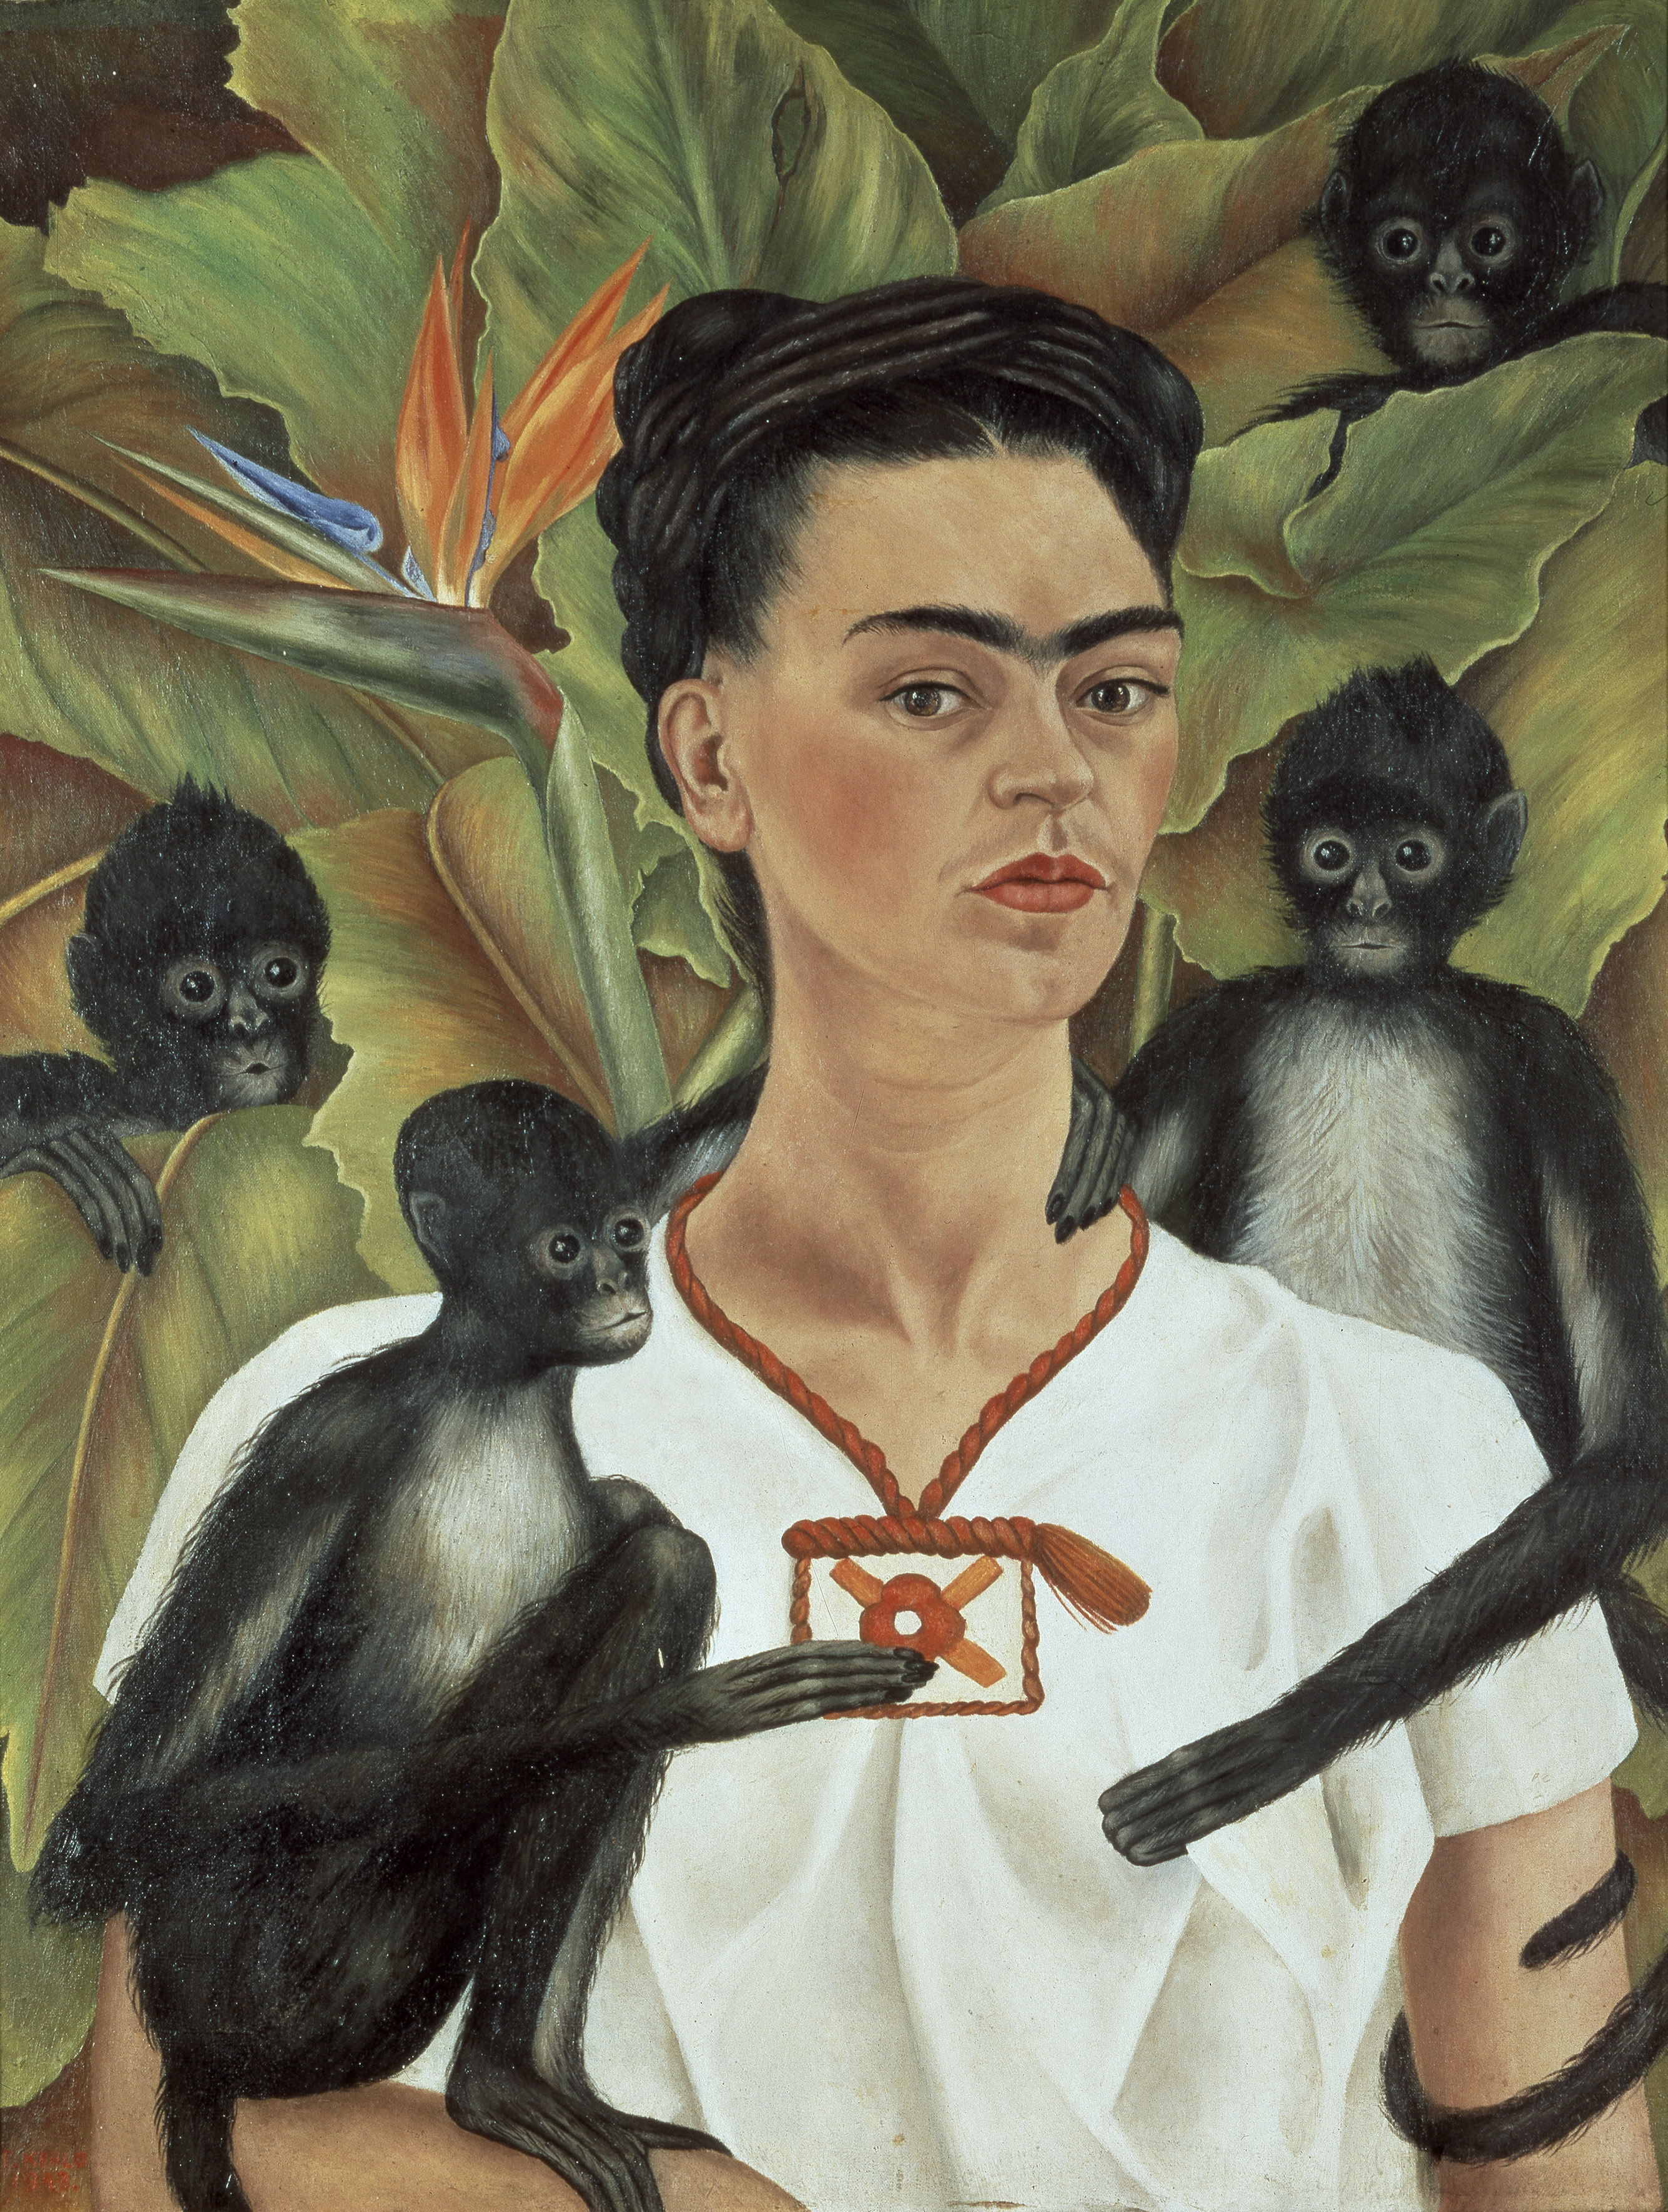 <p>Image credit: <strong>Frida Kahlo</strong> <em>Self-Portrait with Monkeys</em> 1943. The Jacques and Natasha Gelman Collection of 20th Century Mexican Art and the Vergel Foundation</p>